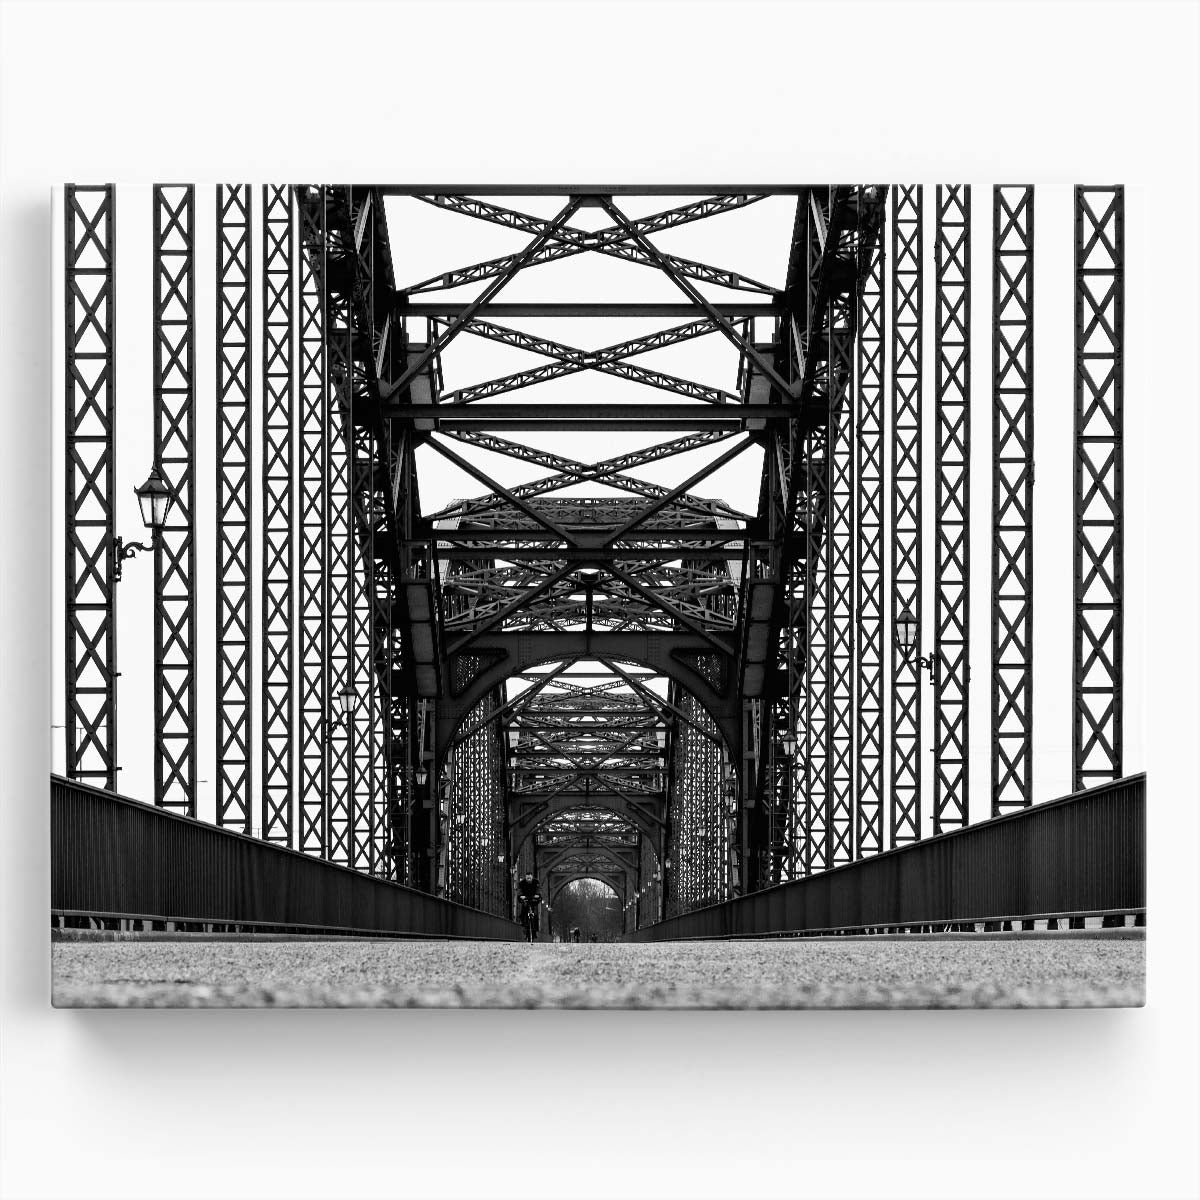 Hamburg Bridge Steel Contrast Black and White Wall Art by Luxuriance Designs. Made in USA.